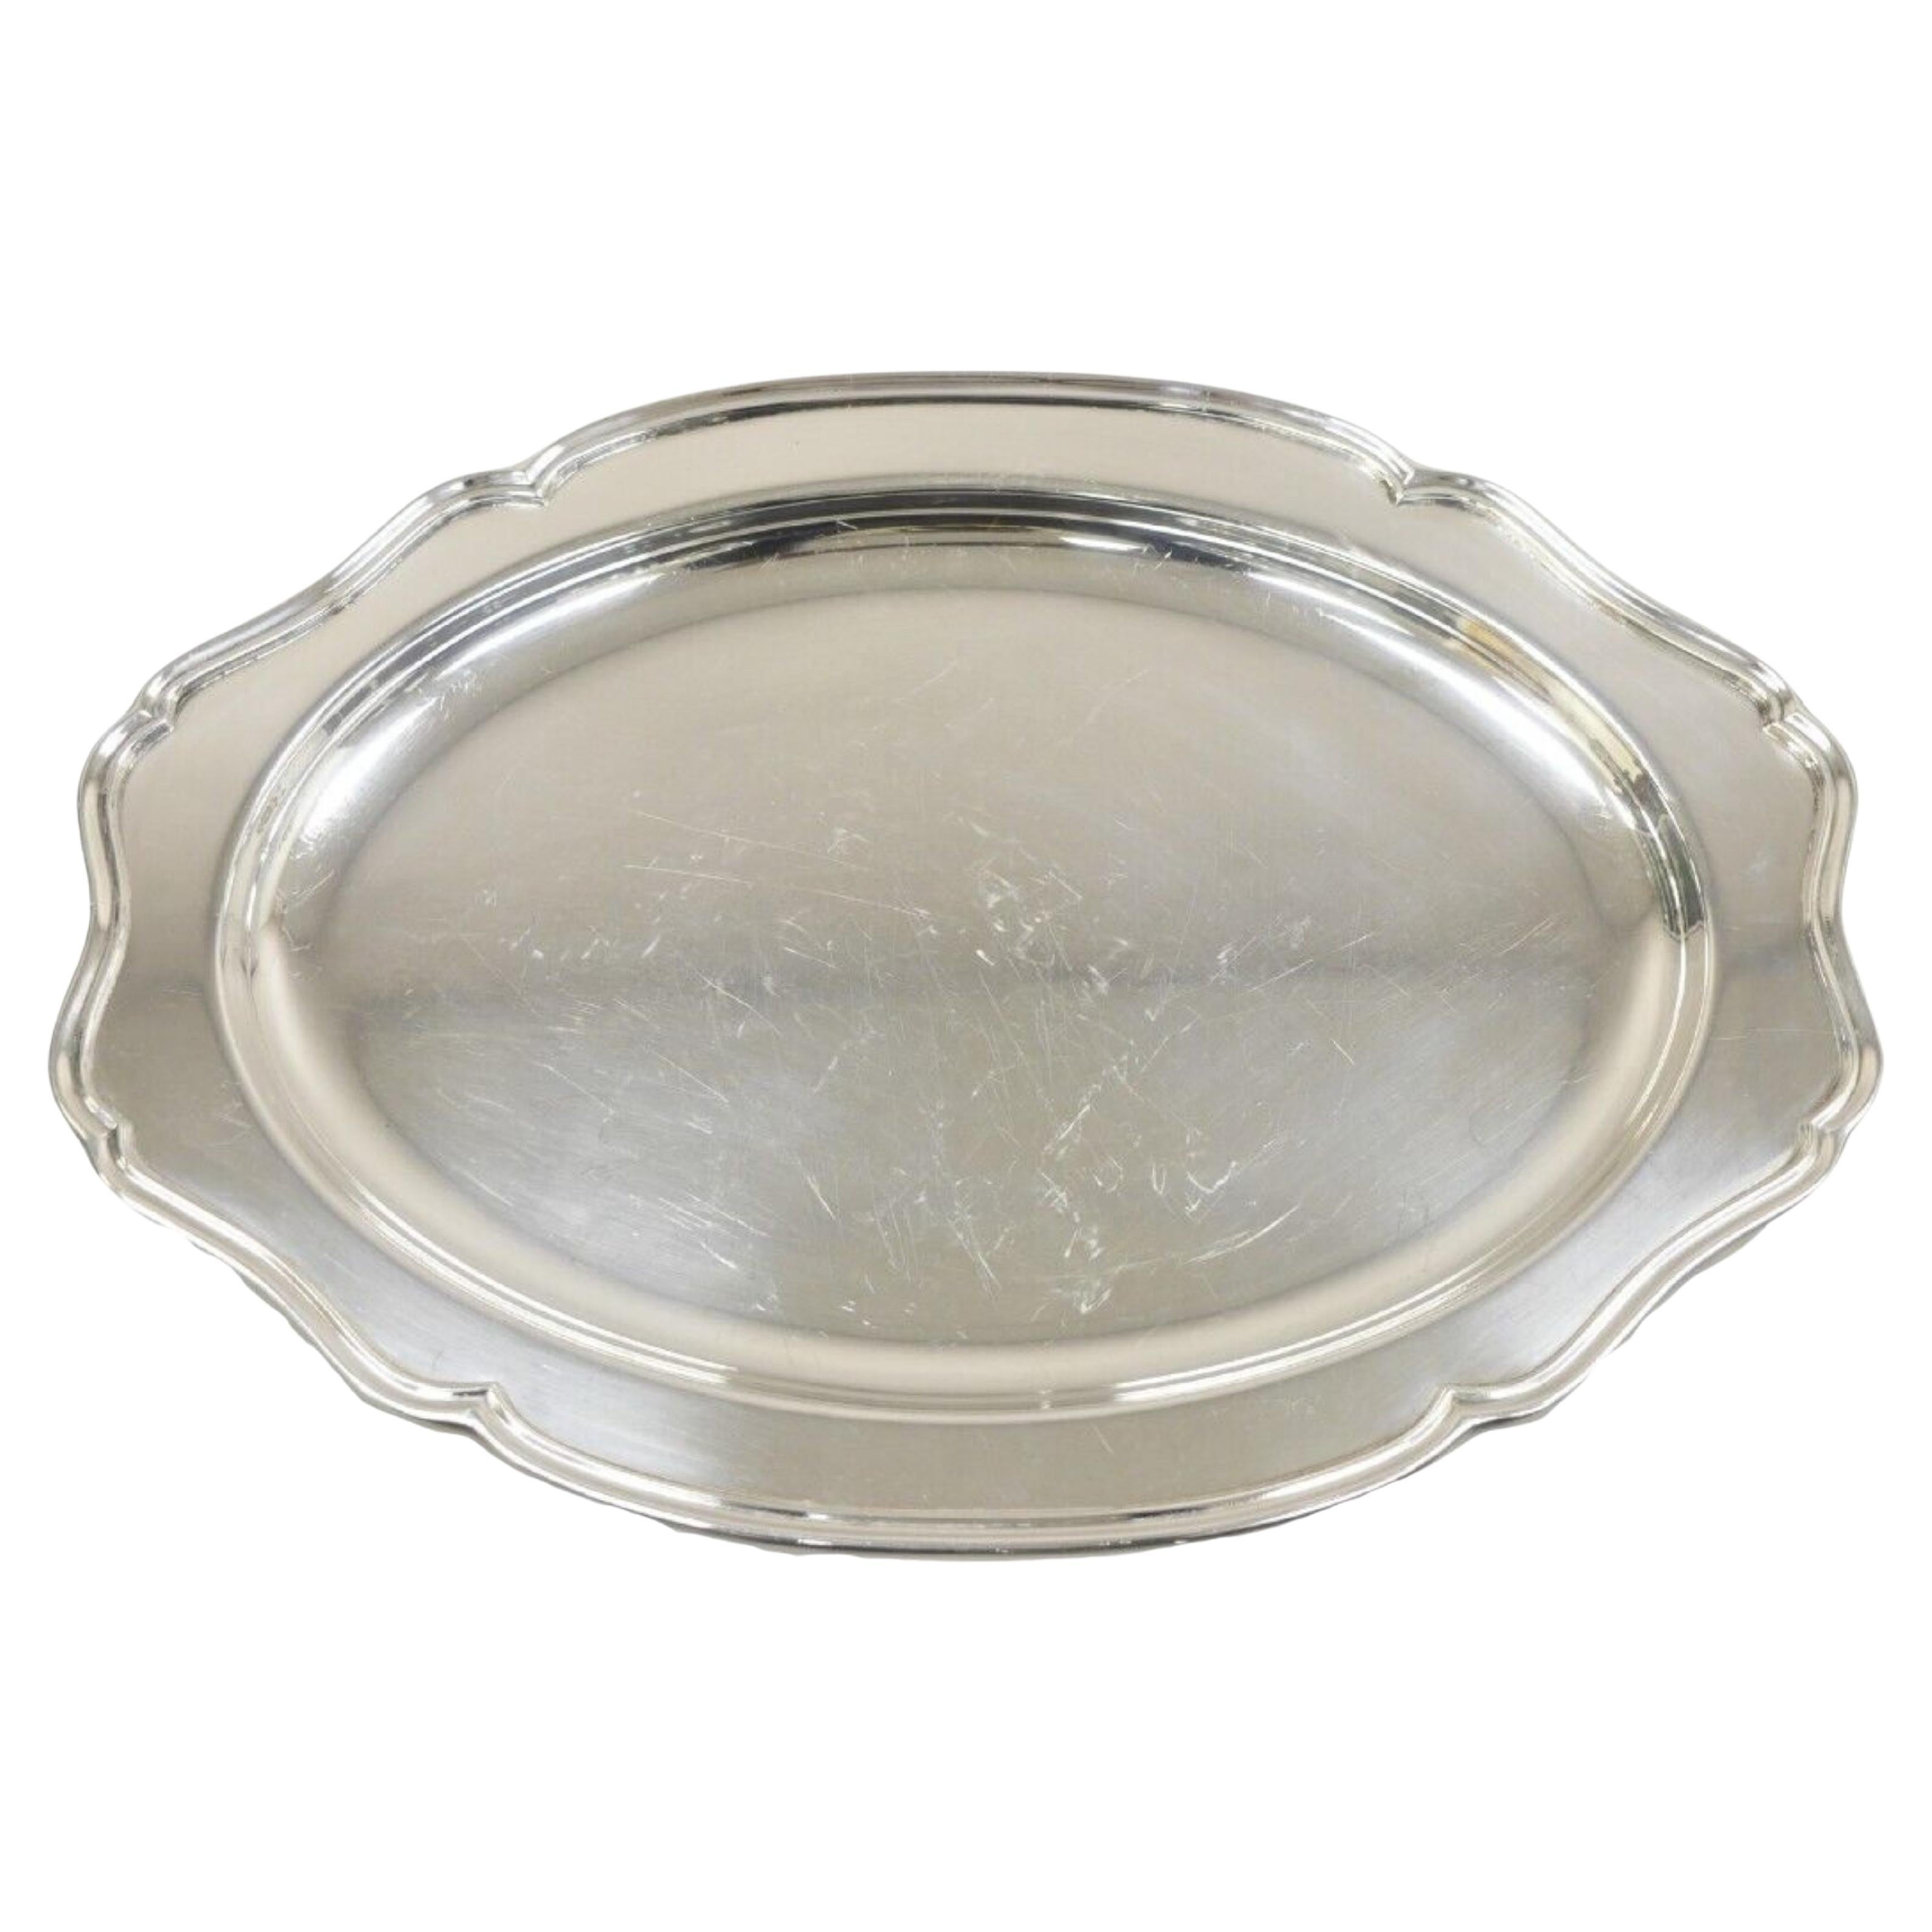 Reed & Barton Hampton Court Silver Plated Oval Scalloped Serving Platter Tray